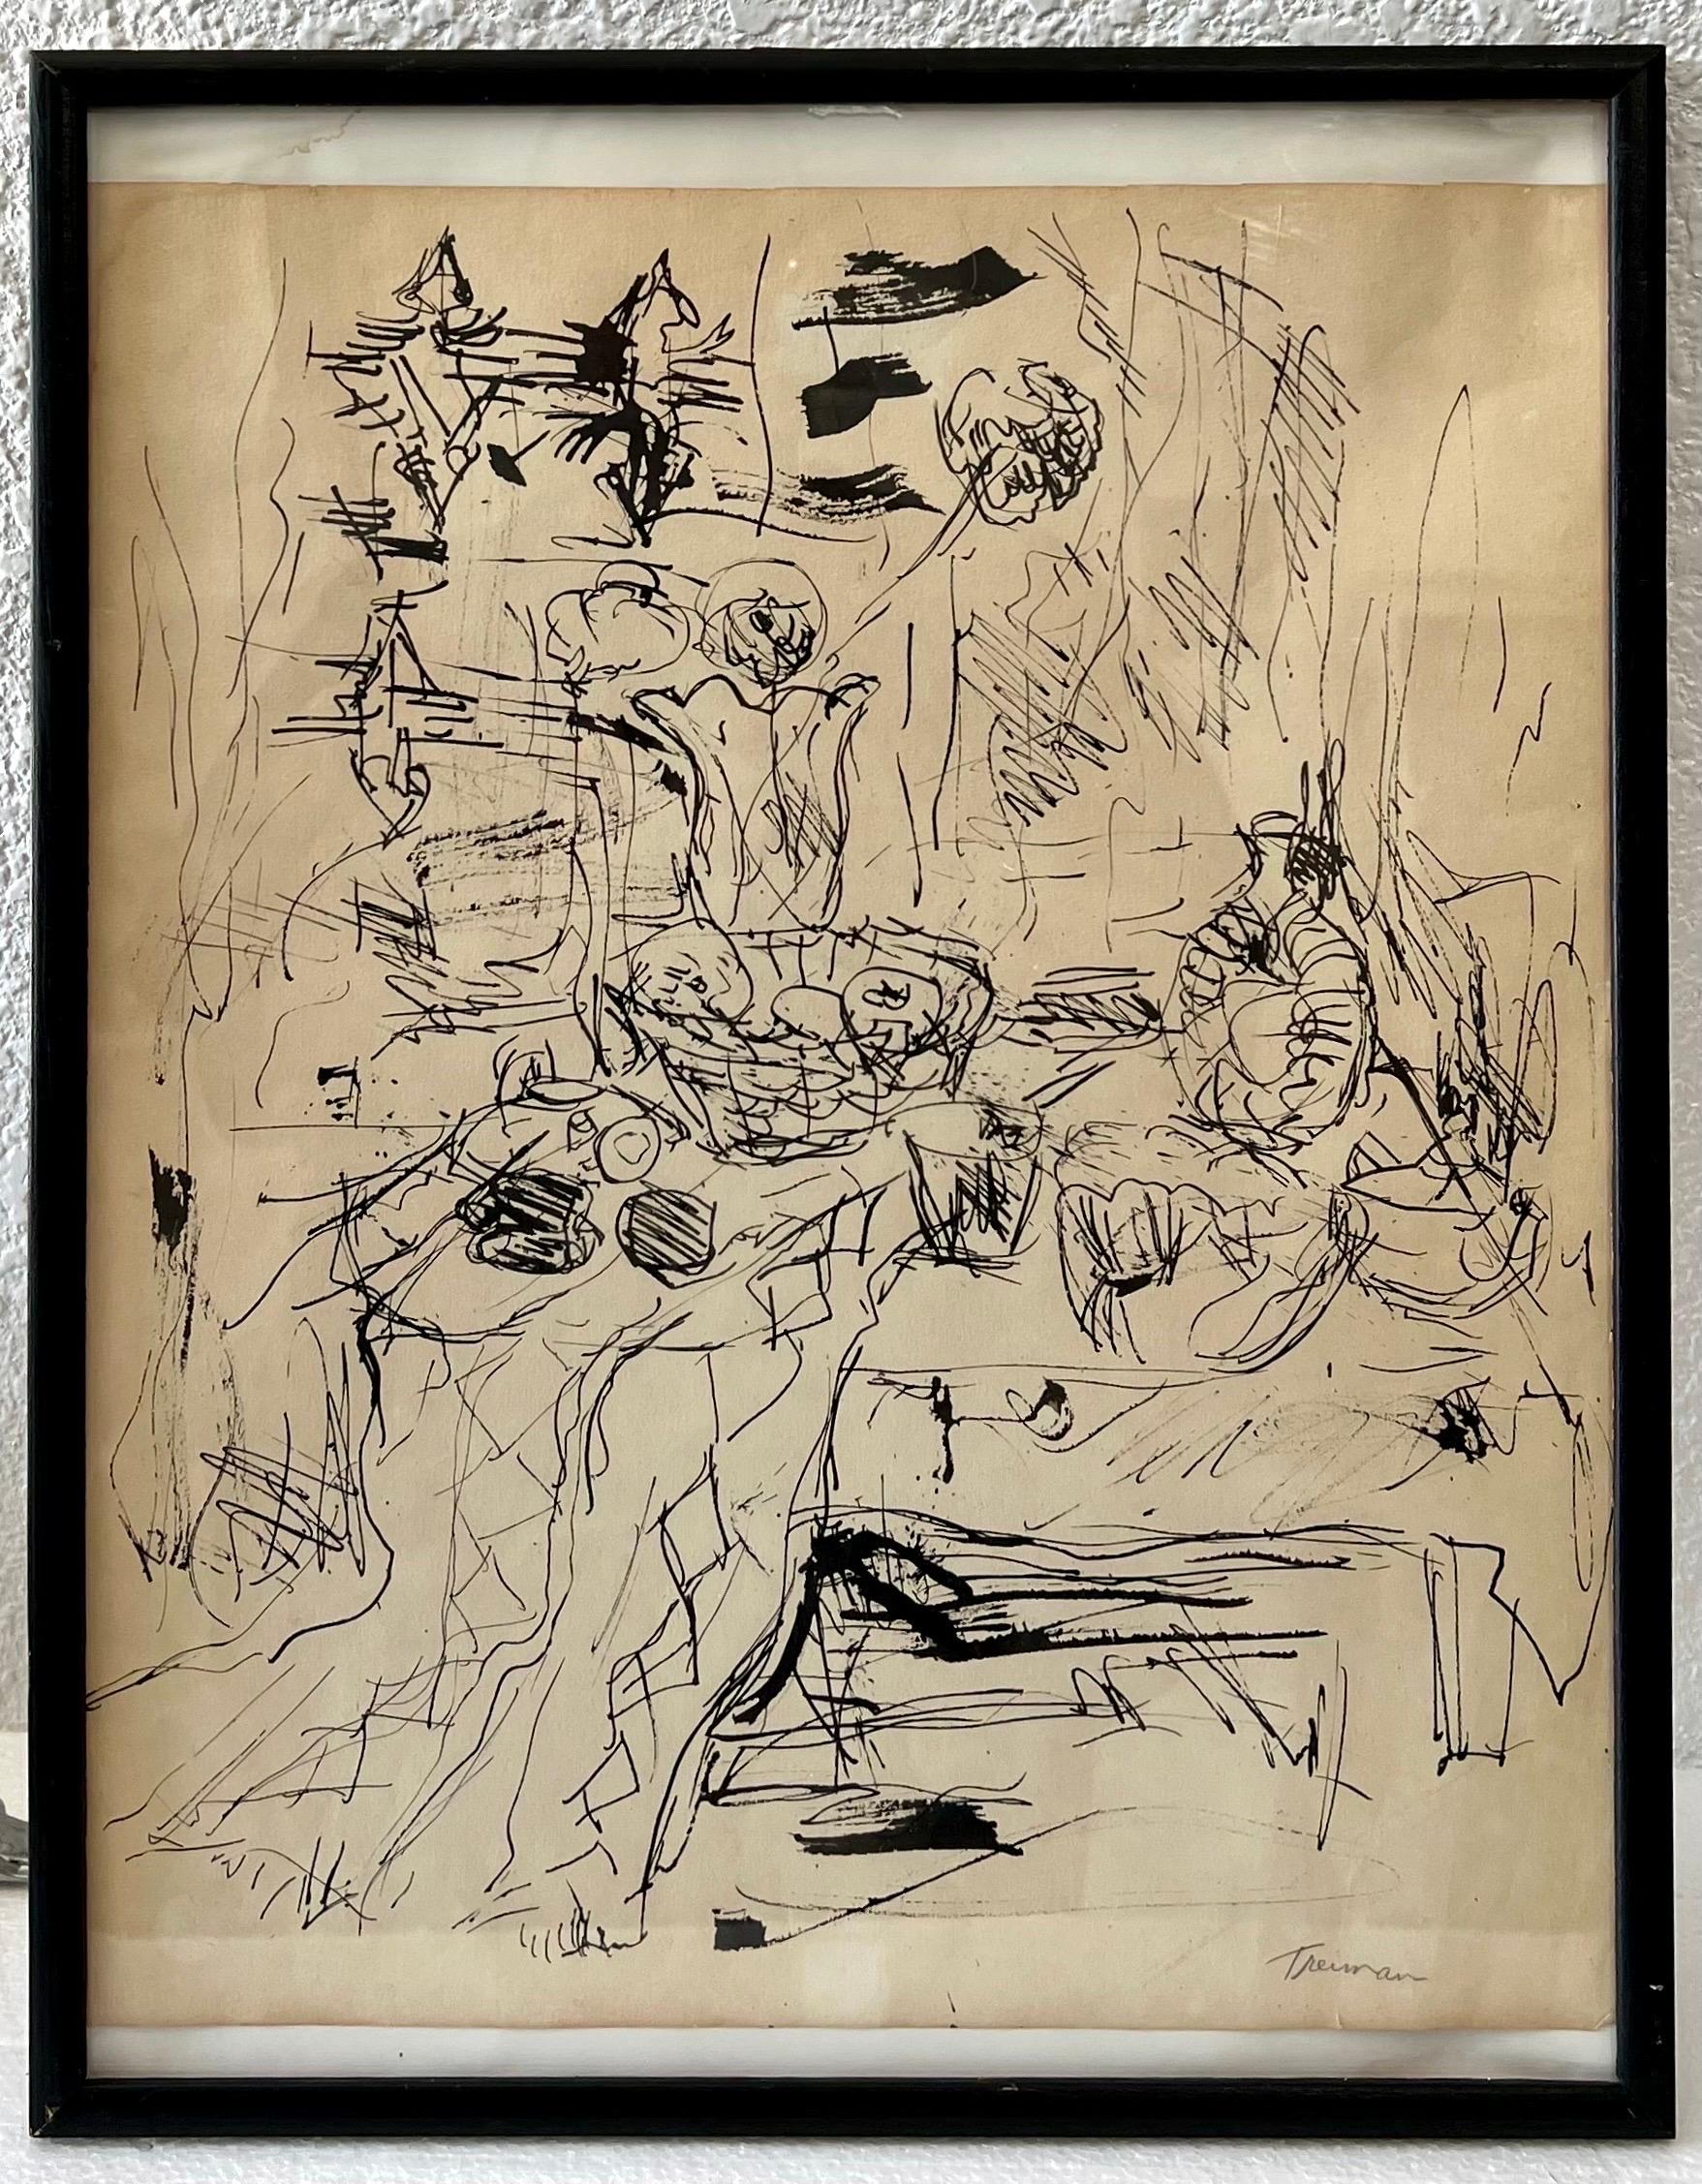 Joyce Treiman
Ink on paper, framed under glass; signed in pencil lower right; 
Dimensions: 16 1/2 x 13 3/4 inches; 18 3/4 x 14 3/4 inches frame.

Joyce Wahl Treiman was an American painter, printmaker, sculptor and teacher. Her work ranged from 